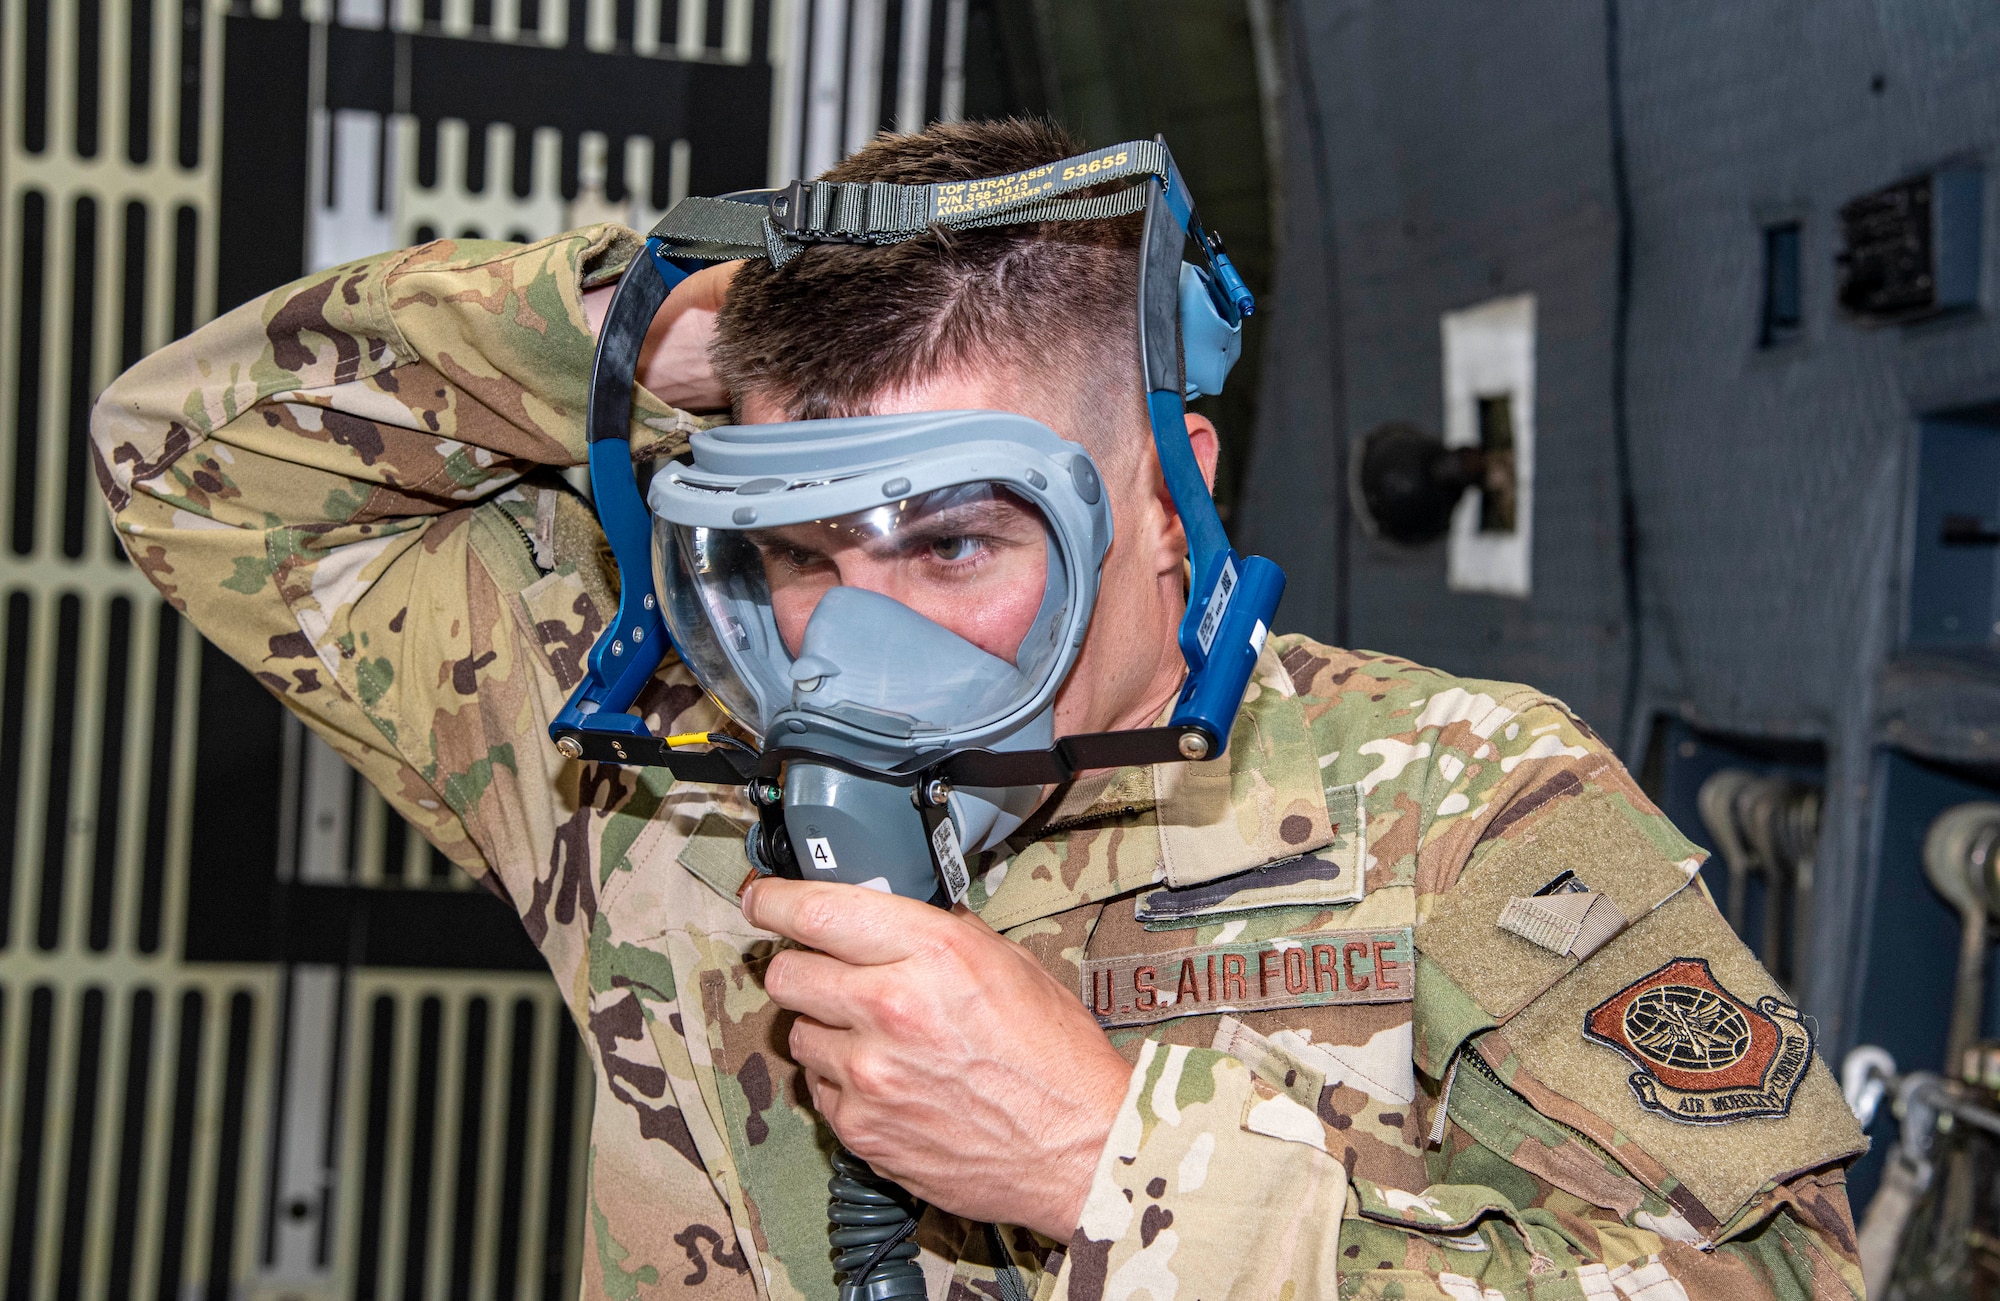 Staff Sgt. Dex Decell, 9th Airlift Squadron loadmaster, dons a 358 Quick Don Demist oxygen mask during a test and evaluation at Dover Air Force Base, Delaware, June 14, 2021. The masks are being tested alongside legacy masks to see how they perform operationally. (U.S. Air Force photo by Tech. Sgt. Nicole Leidholm)